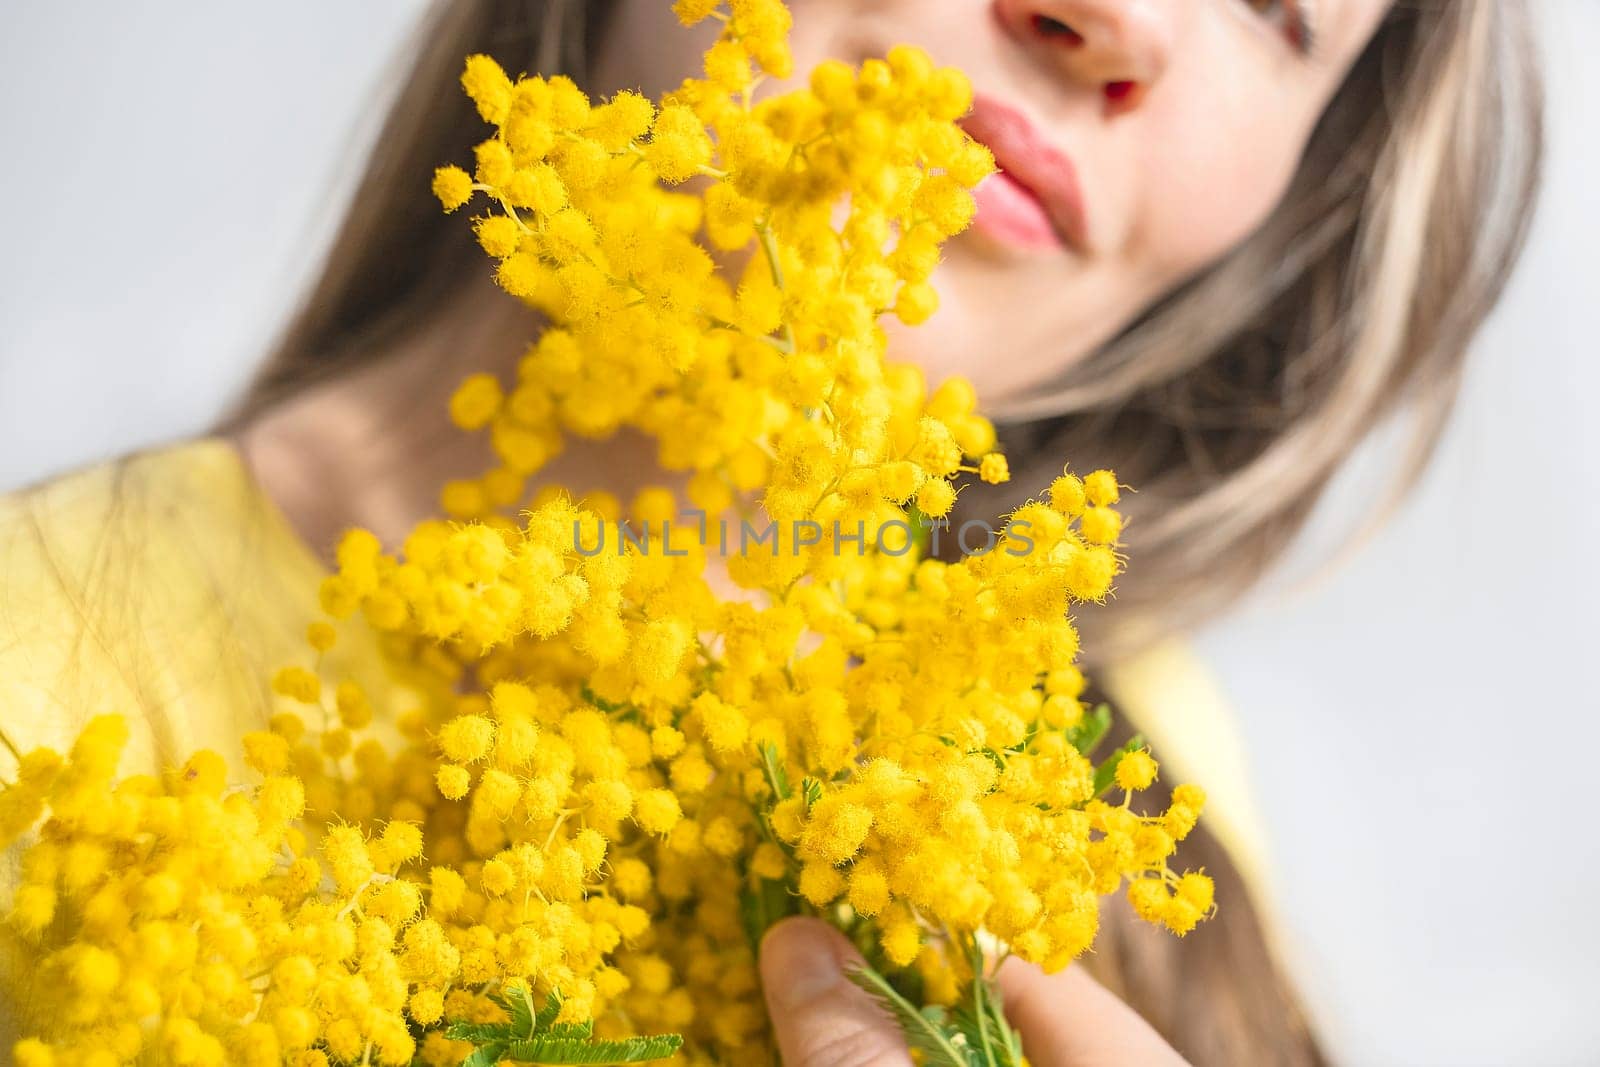 Beautiful young woman with mimosa flowers on white background. Close up